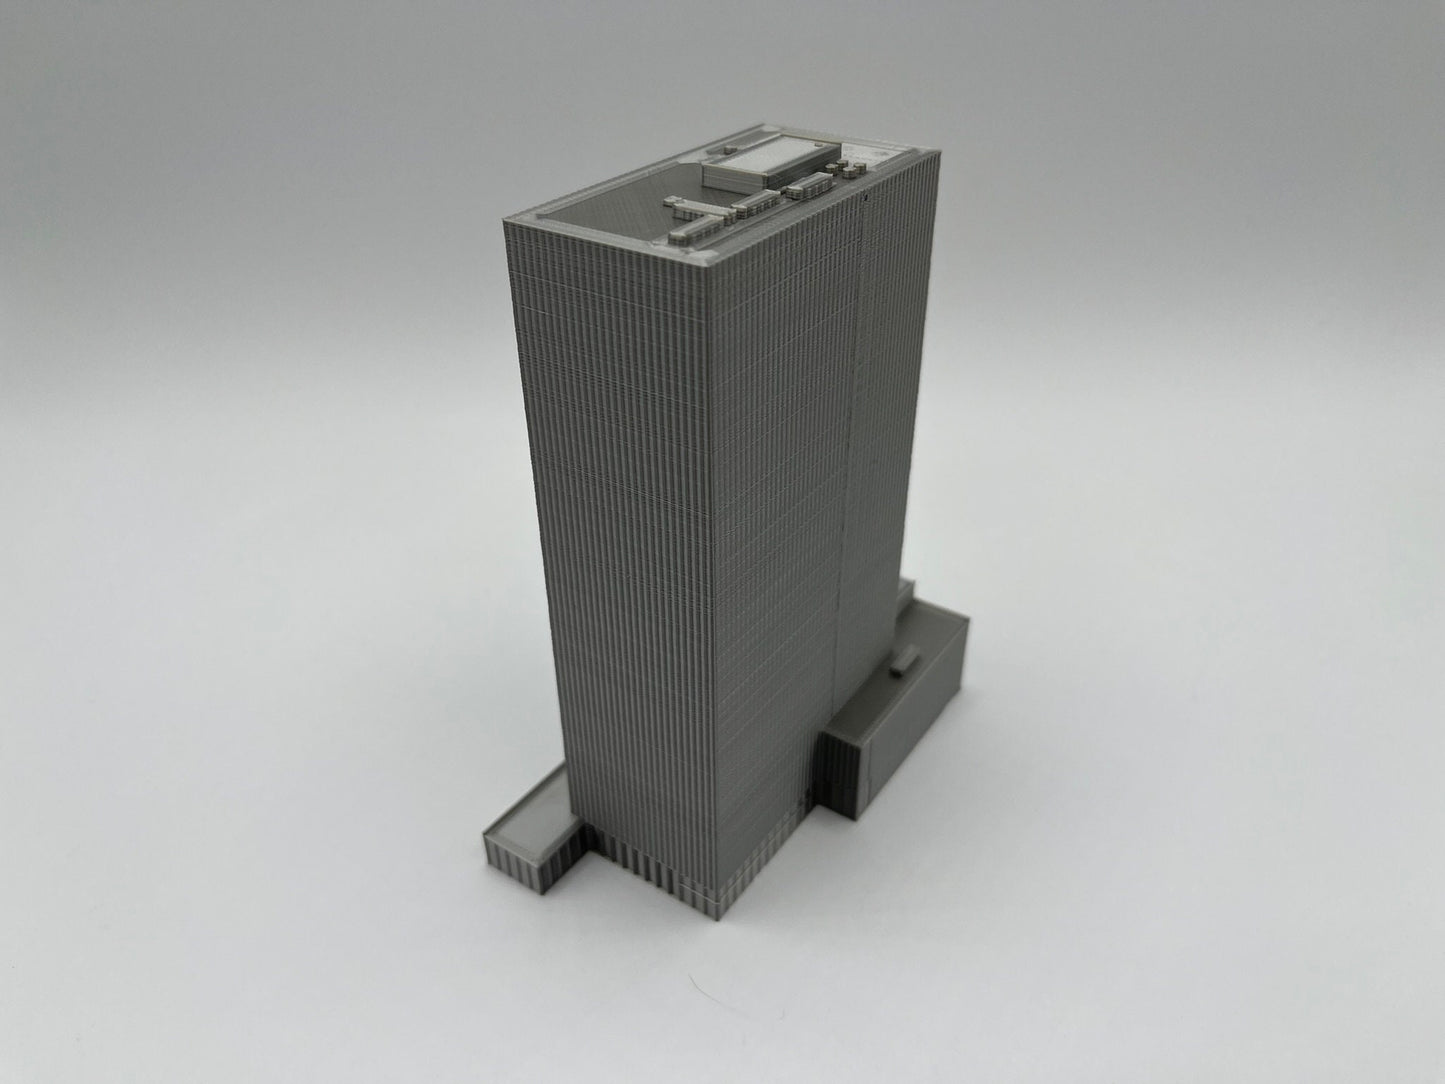 1211 Avenue of the Americas Model- 3D Printed